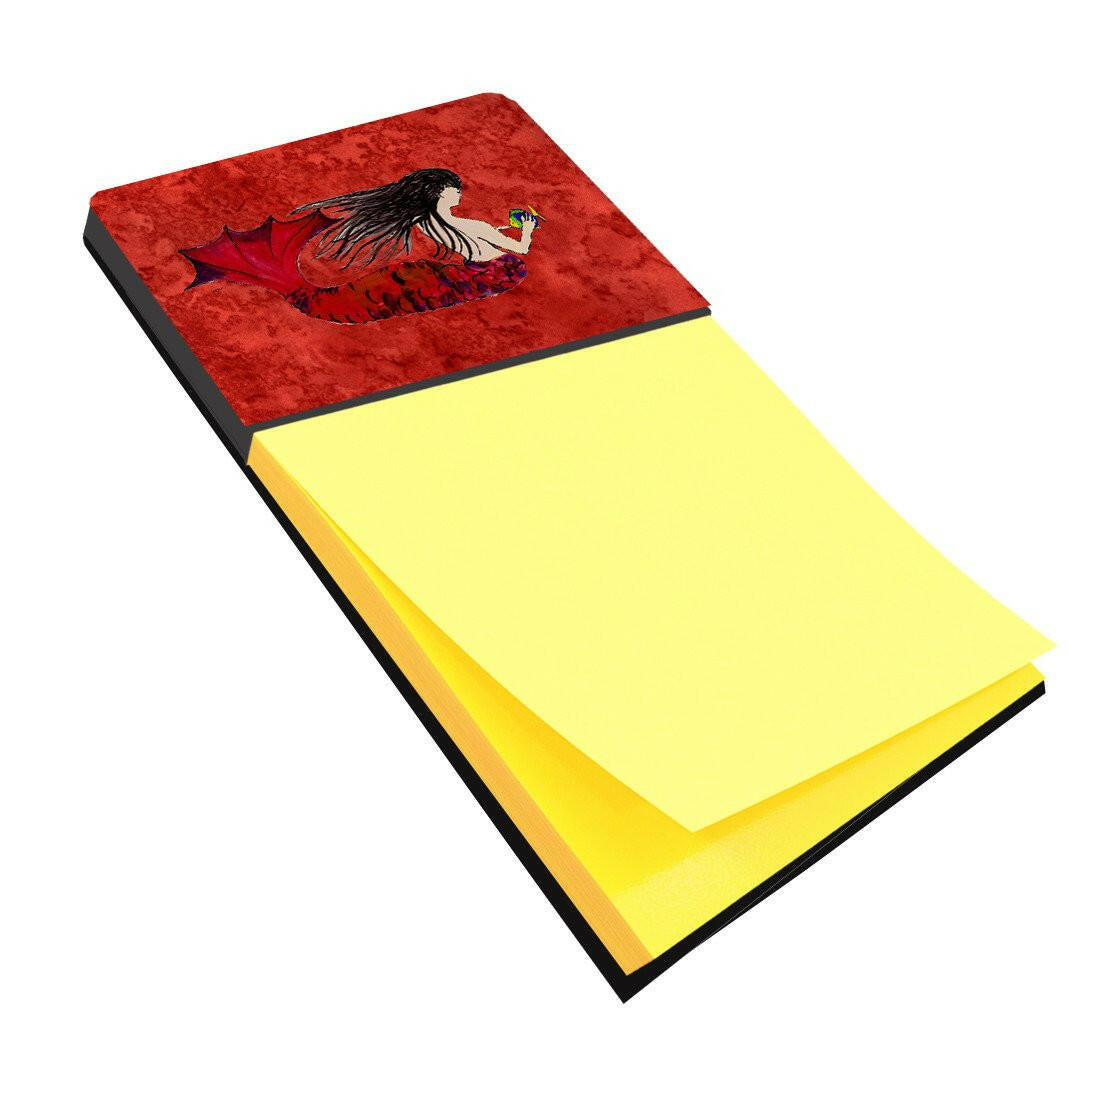 Black Haired Mermaid on Red Sticky Note Holder 8726SN by Caroline&#39;s Treasures